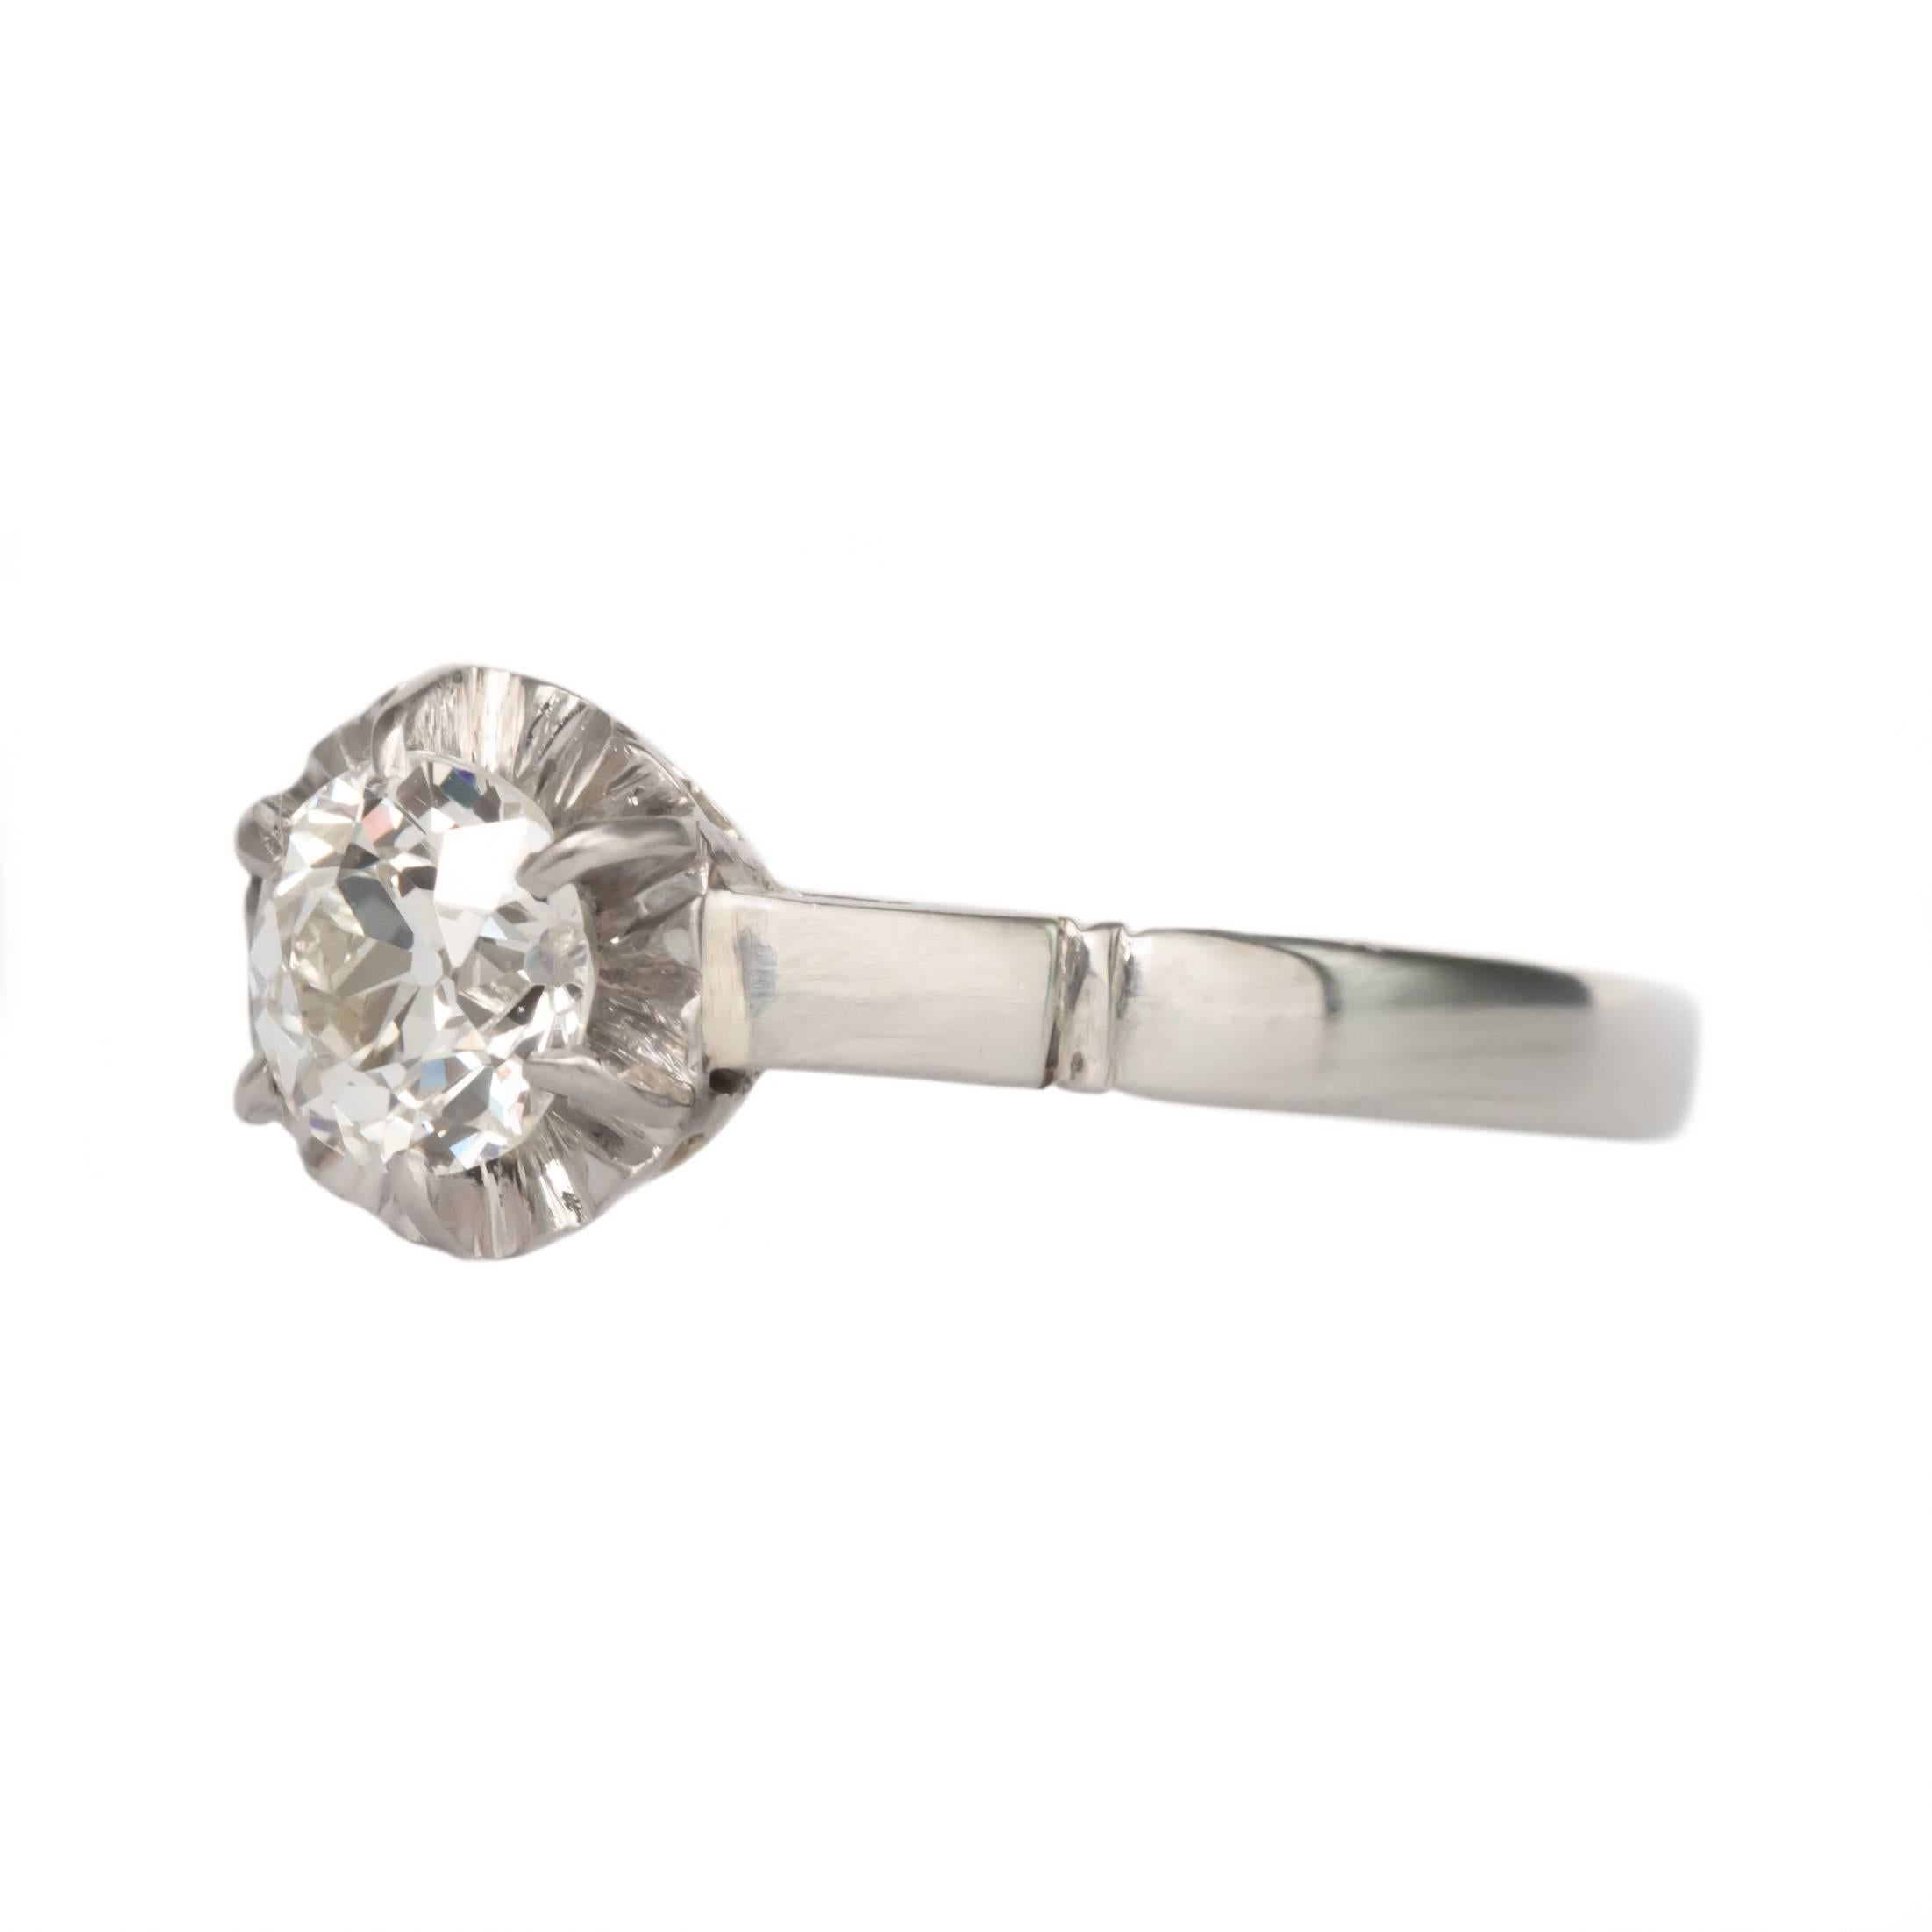 Item Details: 
Ring Size: 7.20
Metal Type: Platinum
Weight: 2.7 grams

Center Diamond Details:
Shape: Antique Cushion
Carat Weight: .63 Carat 
Color: I
Clarity: VS1

Finger to Top of Stone Measurement: 3.51mm